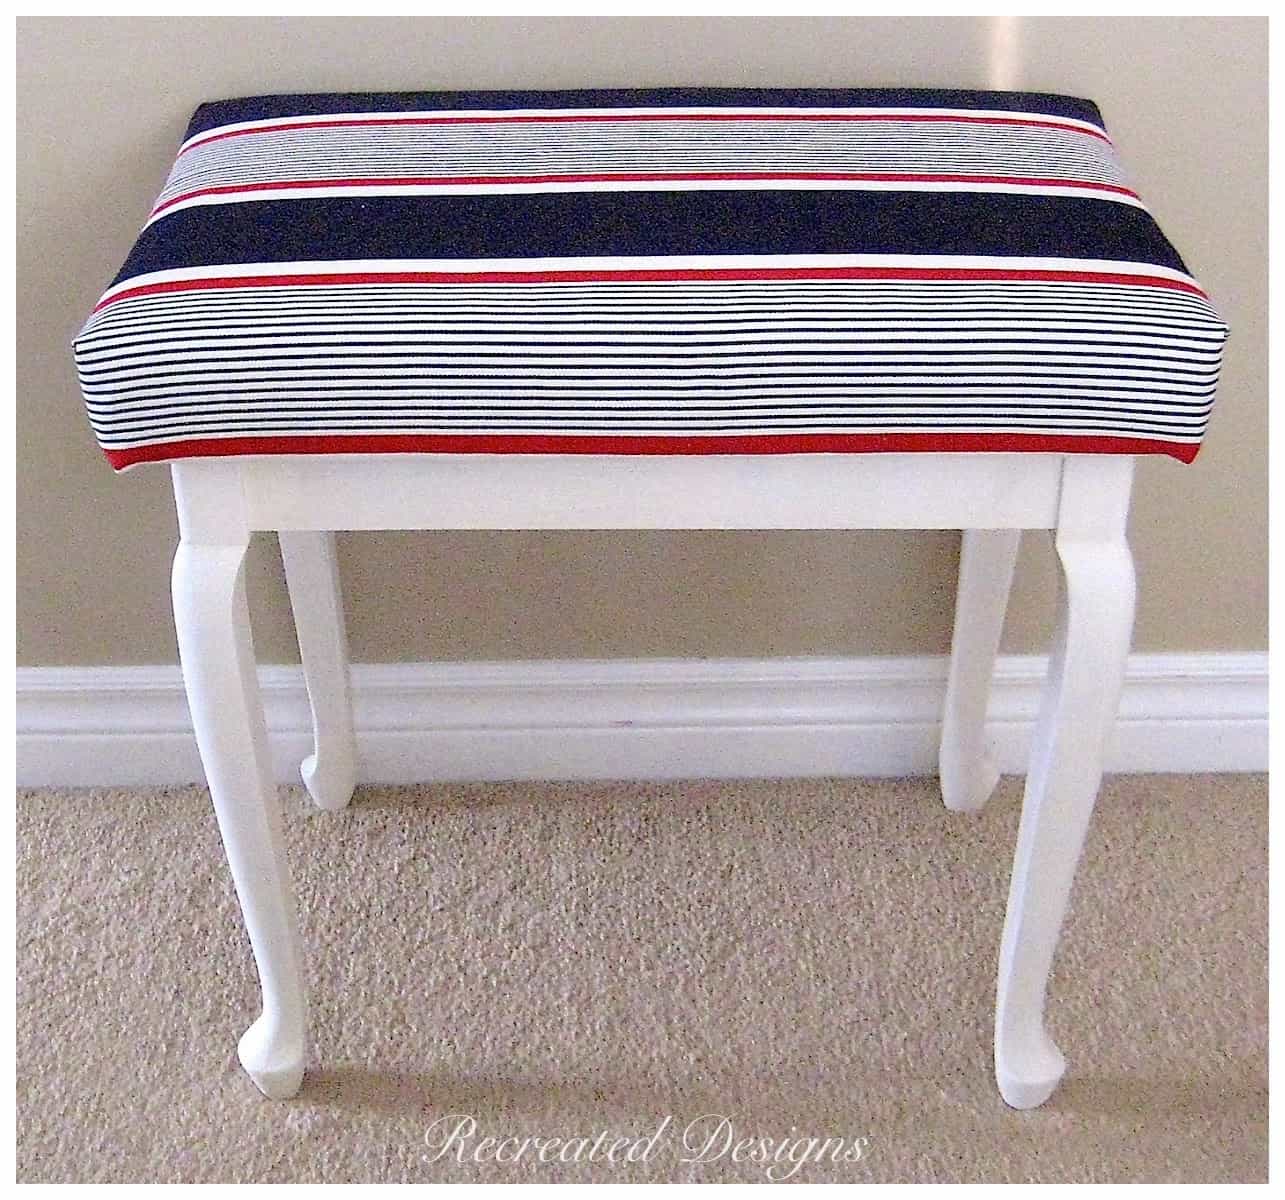 adding Annie Sloan Fabric over foam to turn a side table into a bench